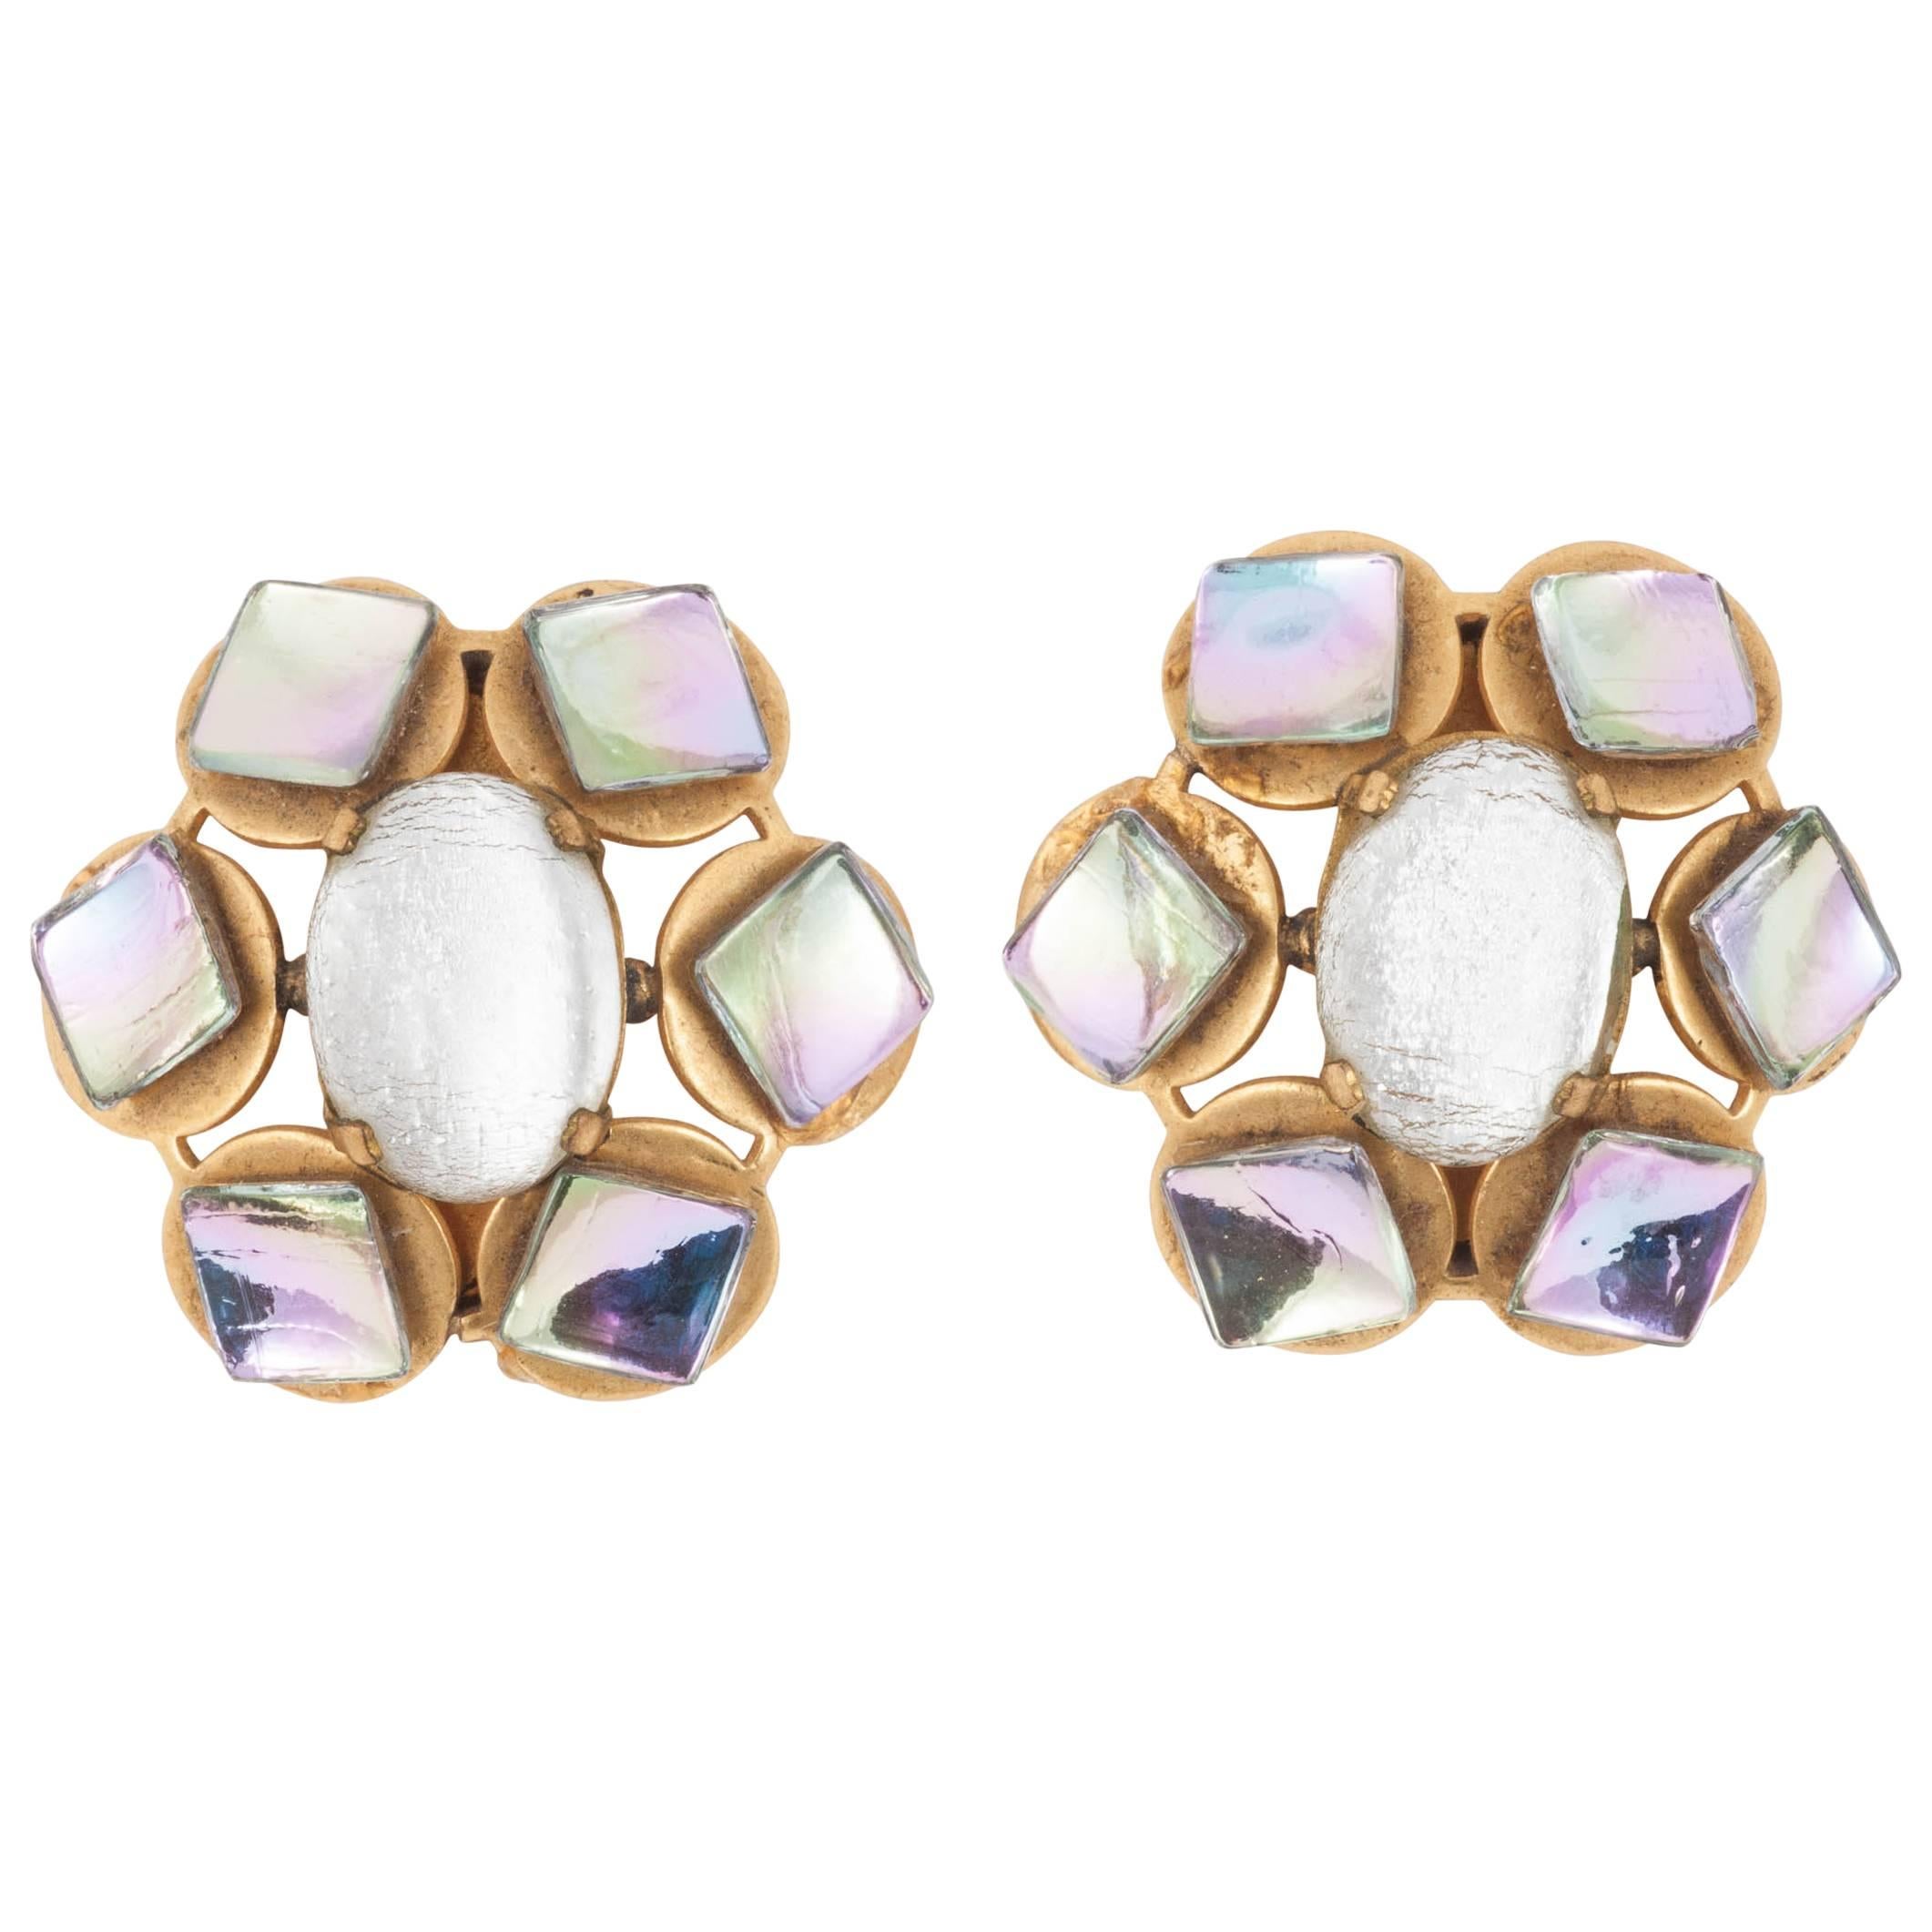  Large opalescent glass and gilt metal earrings, French, 1960s